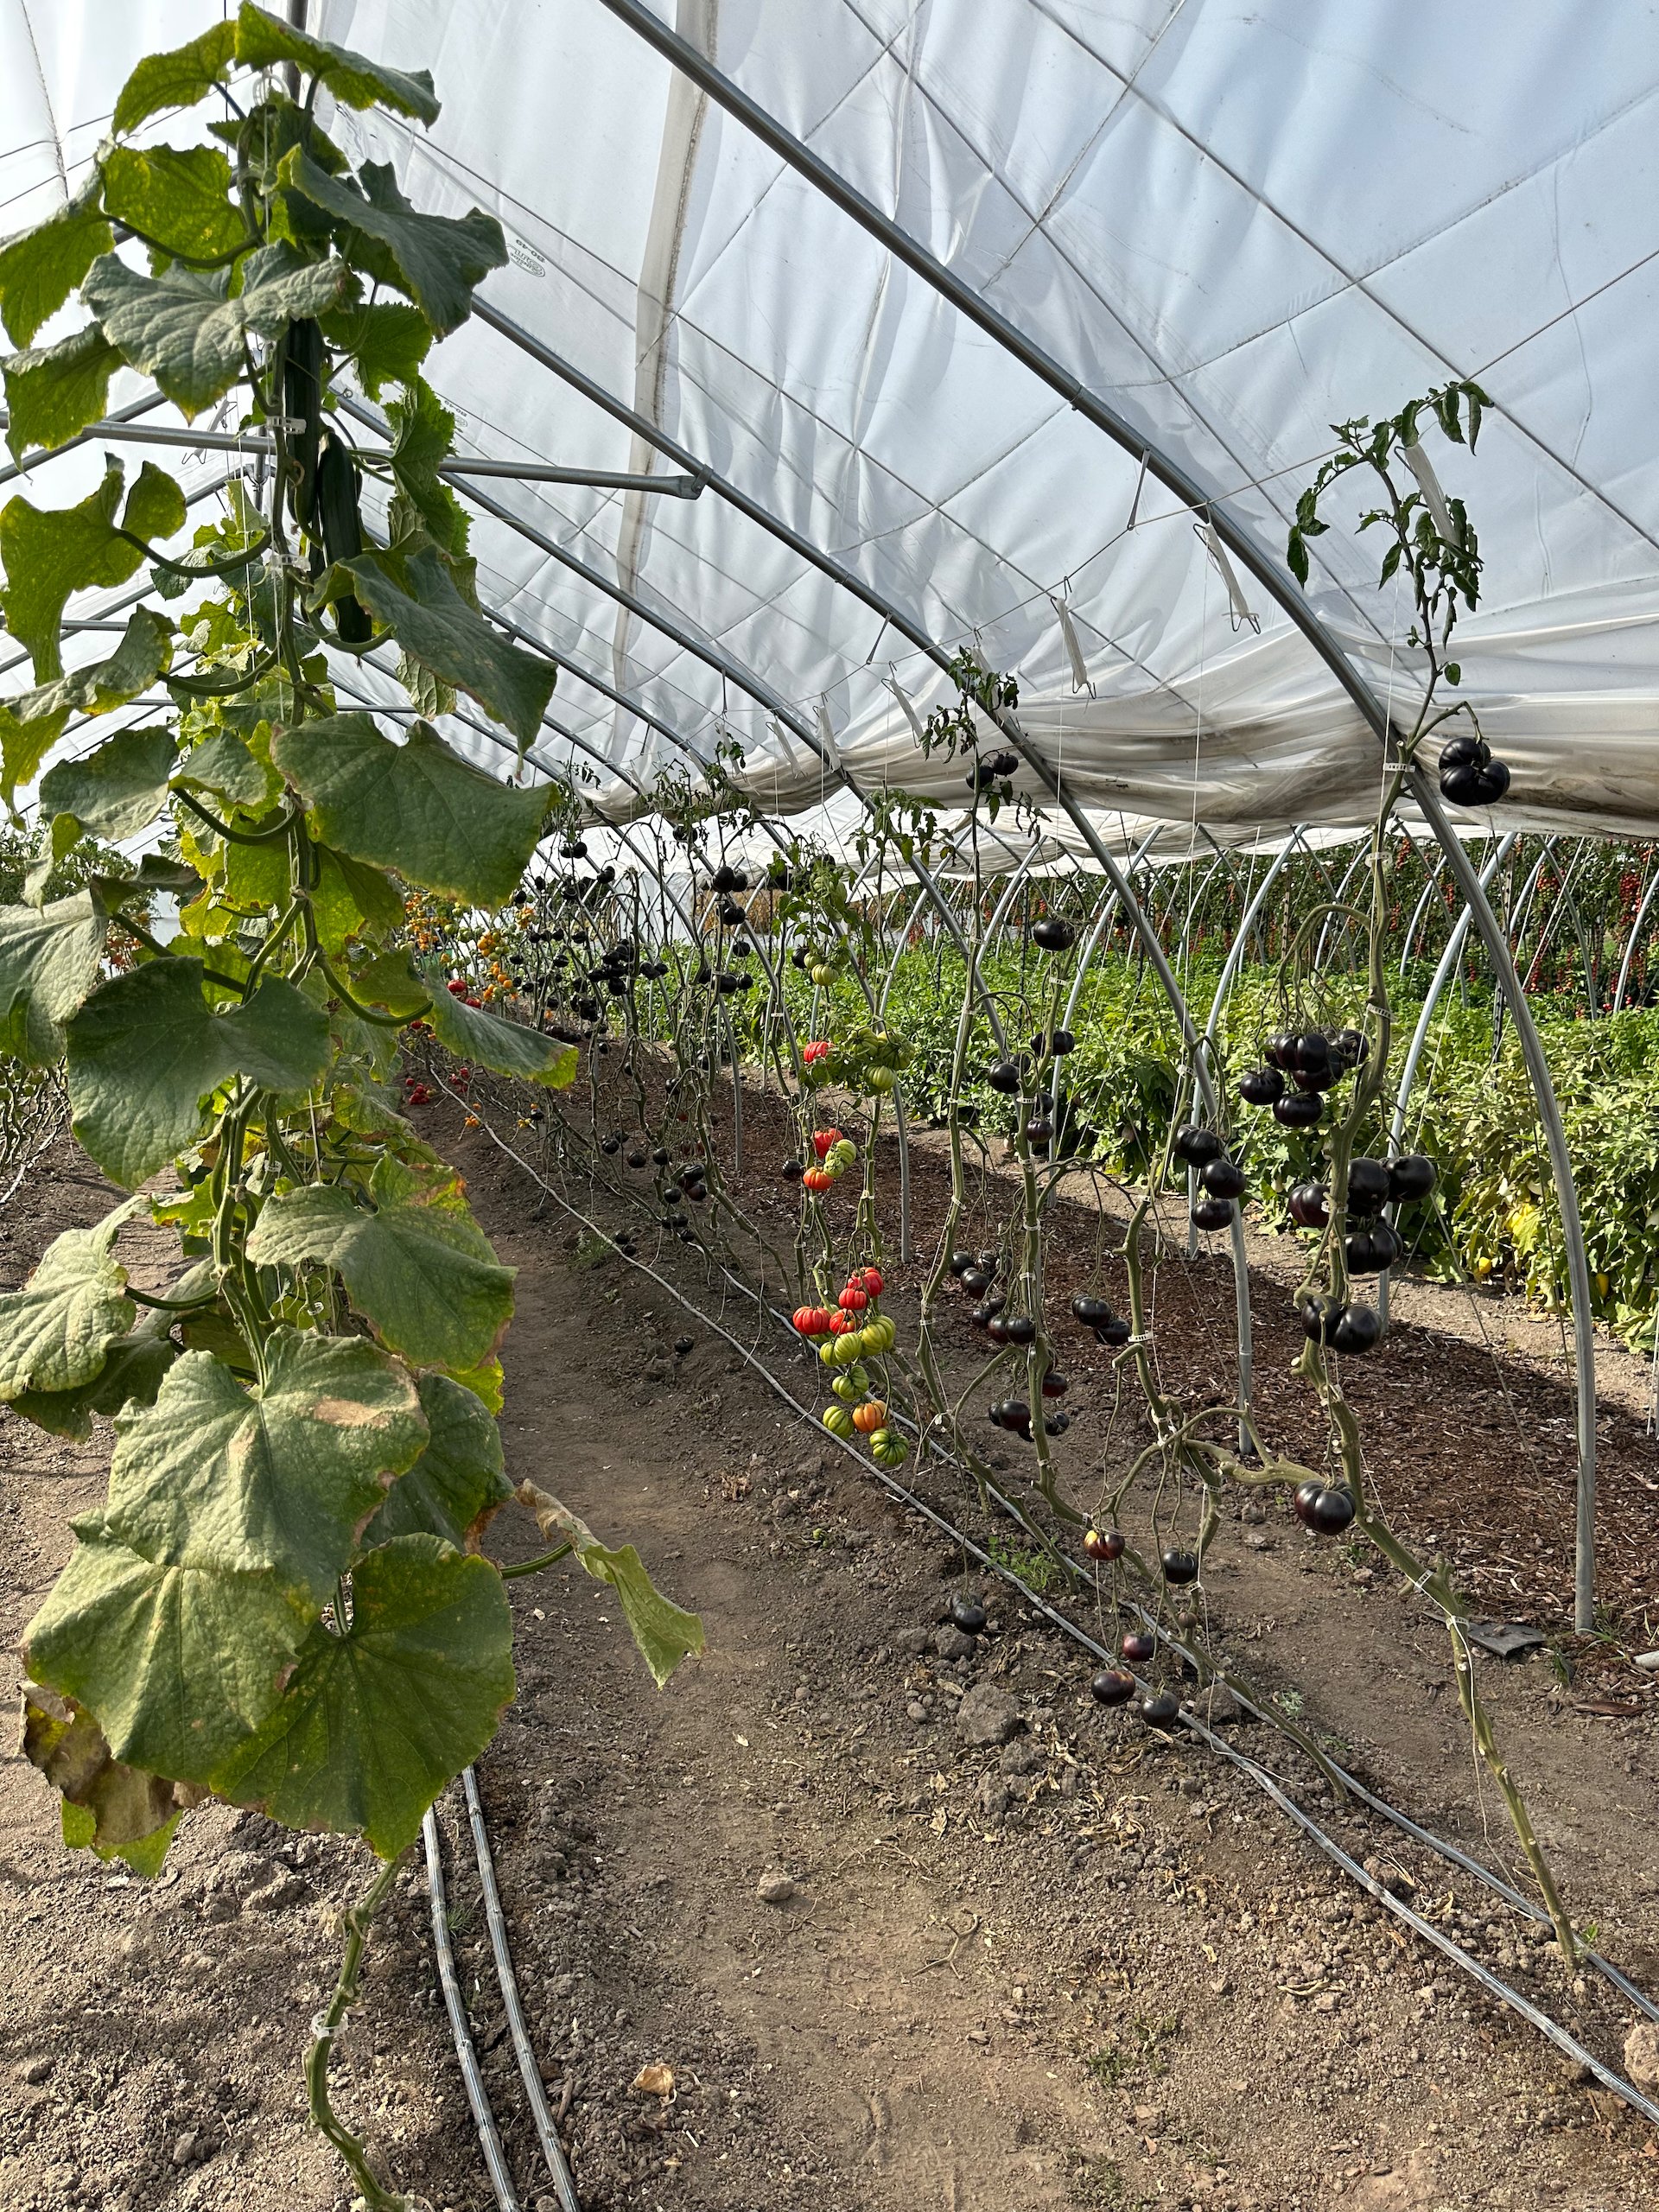  One of the most interesting things for me was to see their greenhouses. This one had cool black tomatoes.  